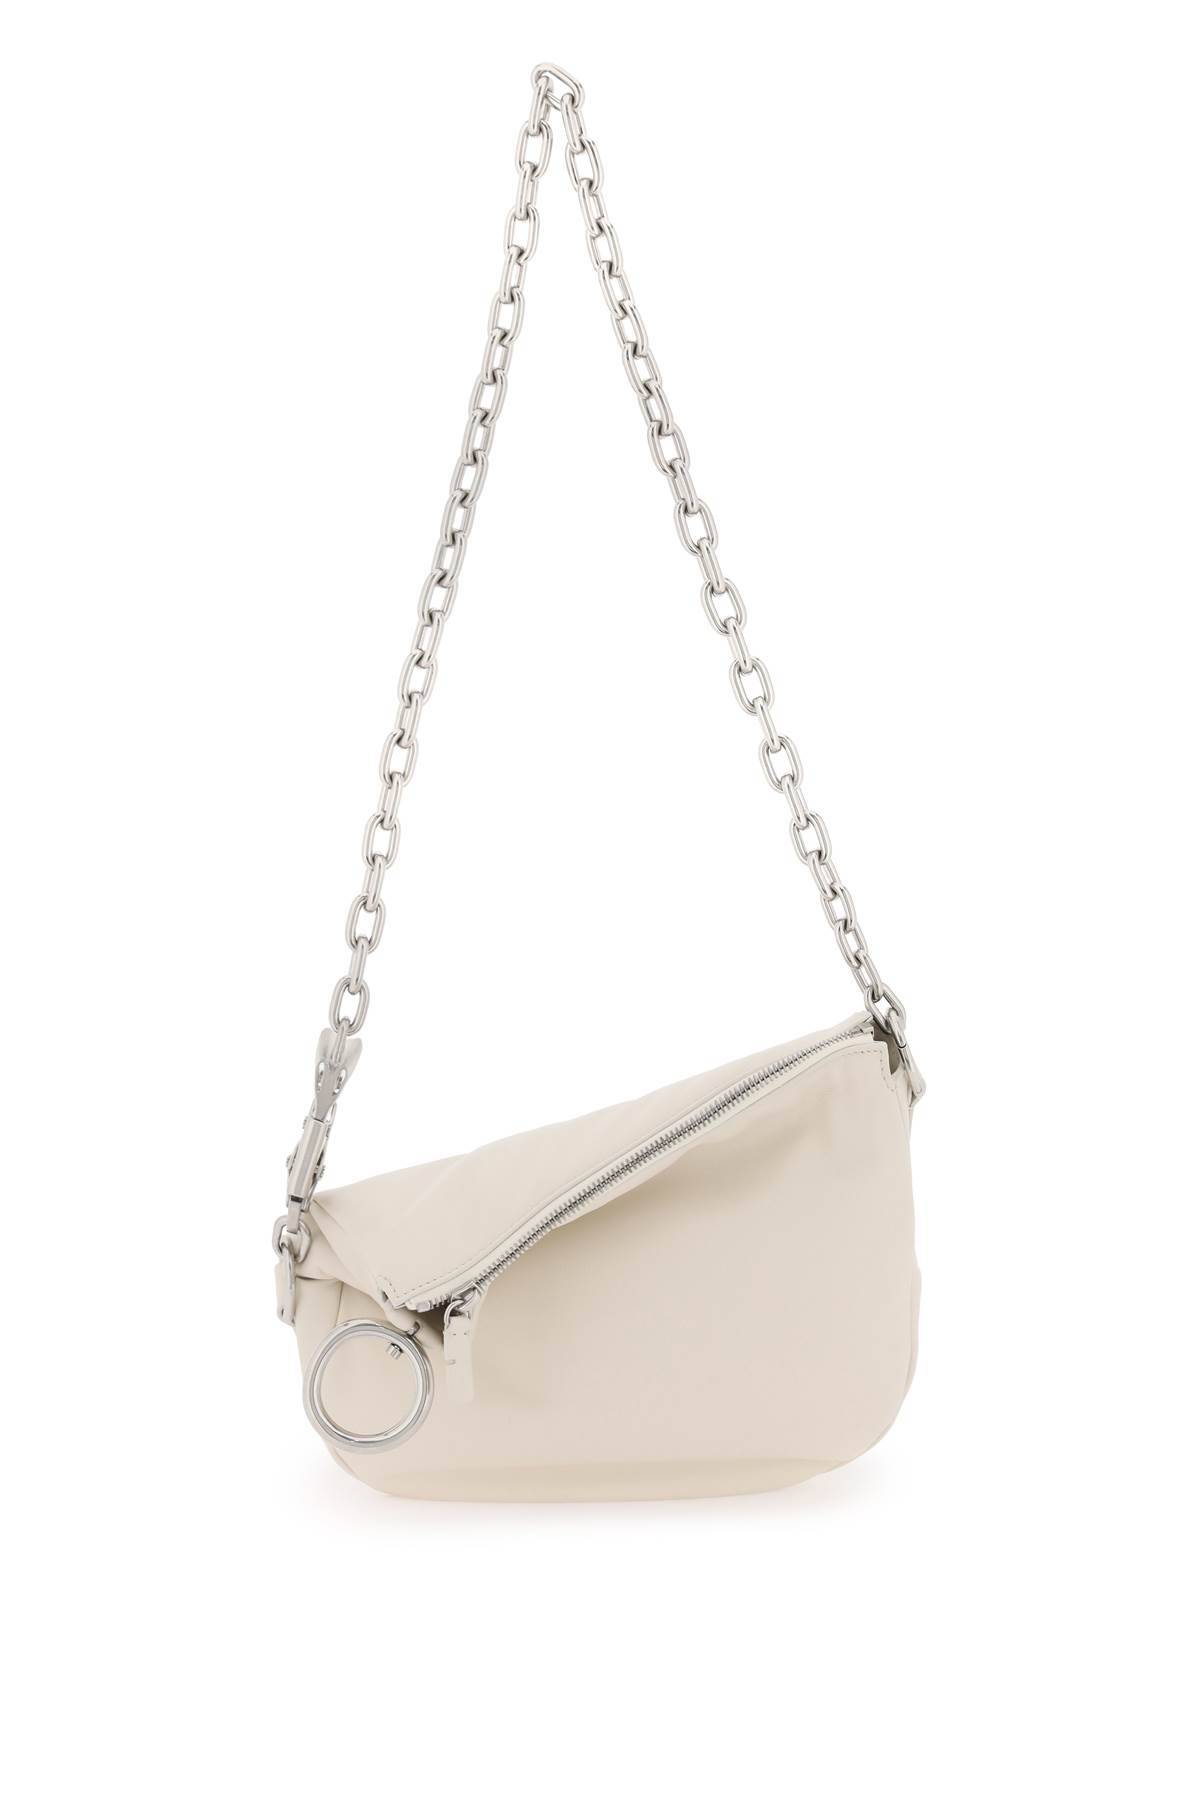 Burberry Knight Small Bag In White